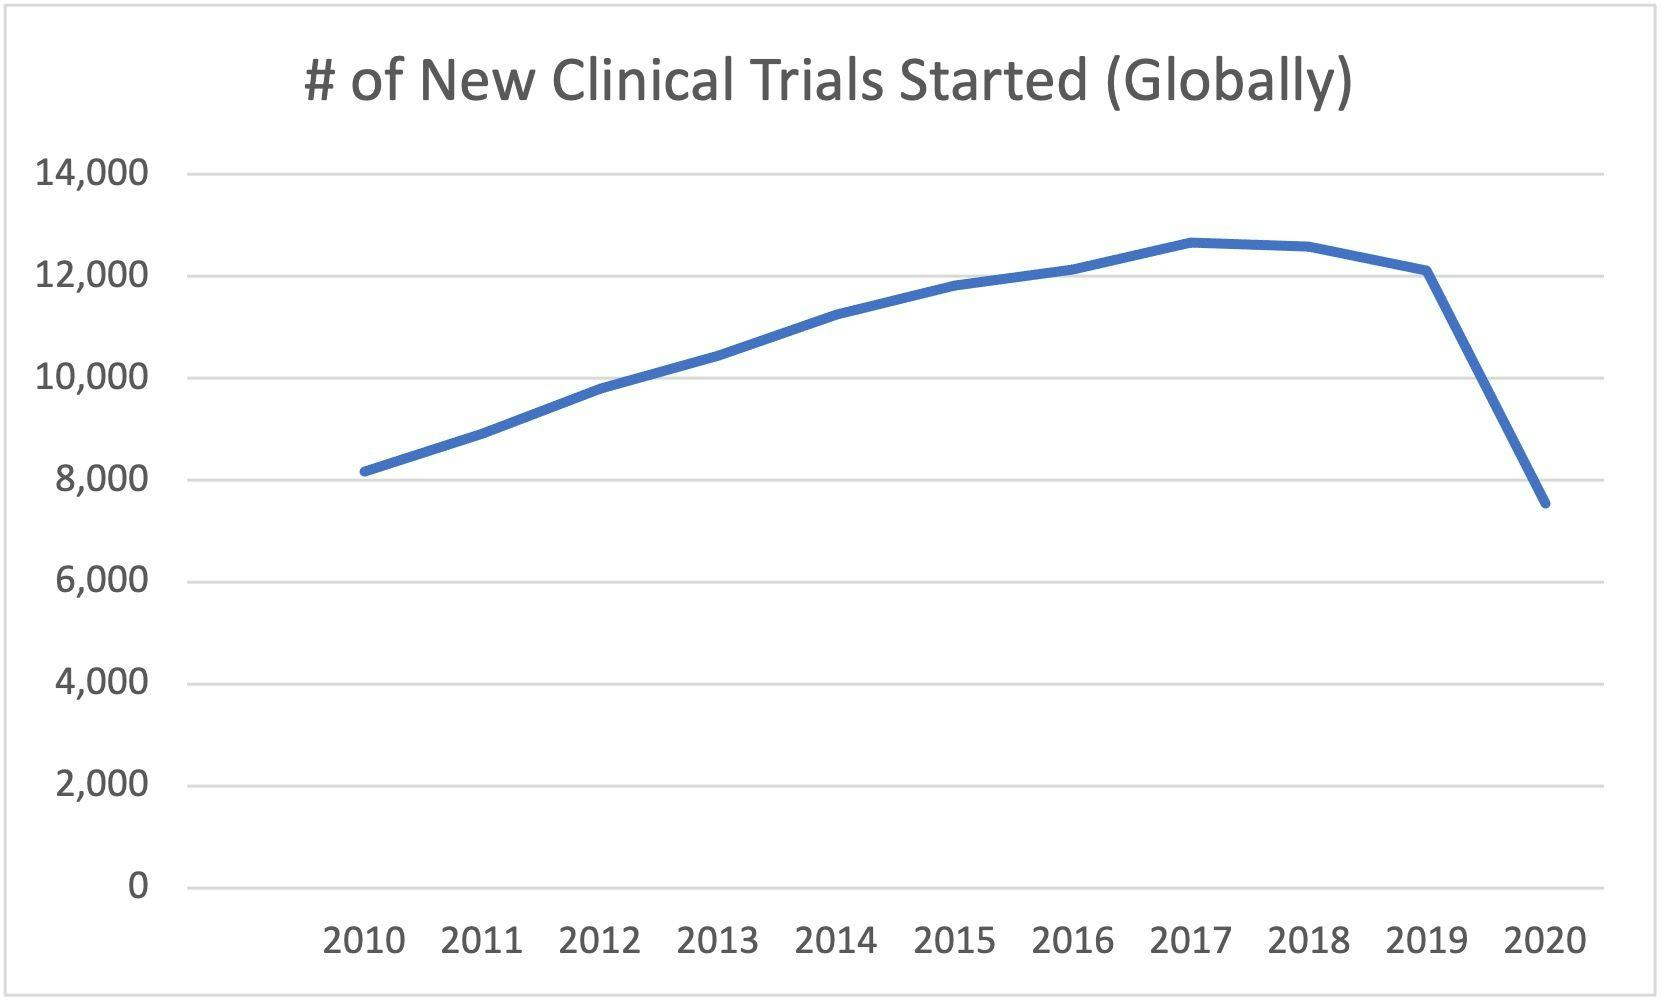 Figure 1: New Clinical Trials Started by Year